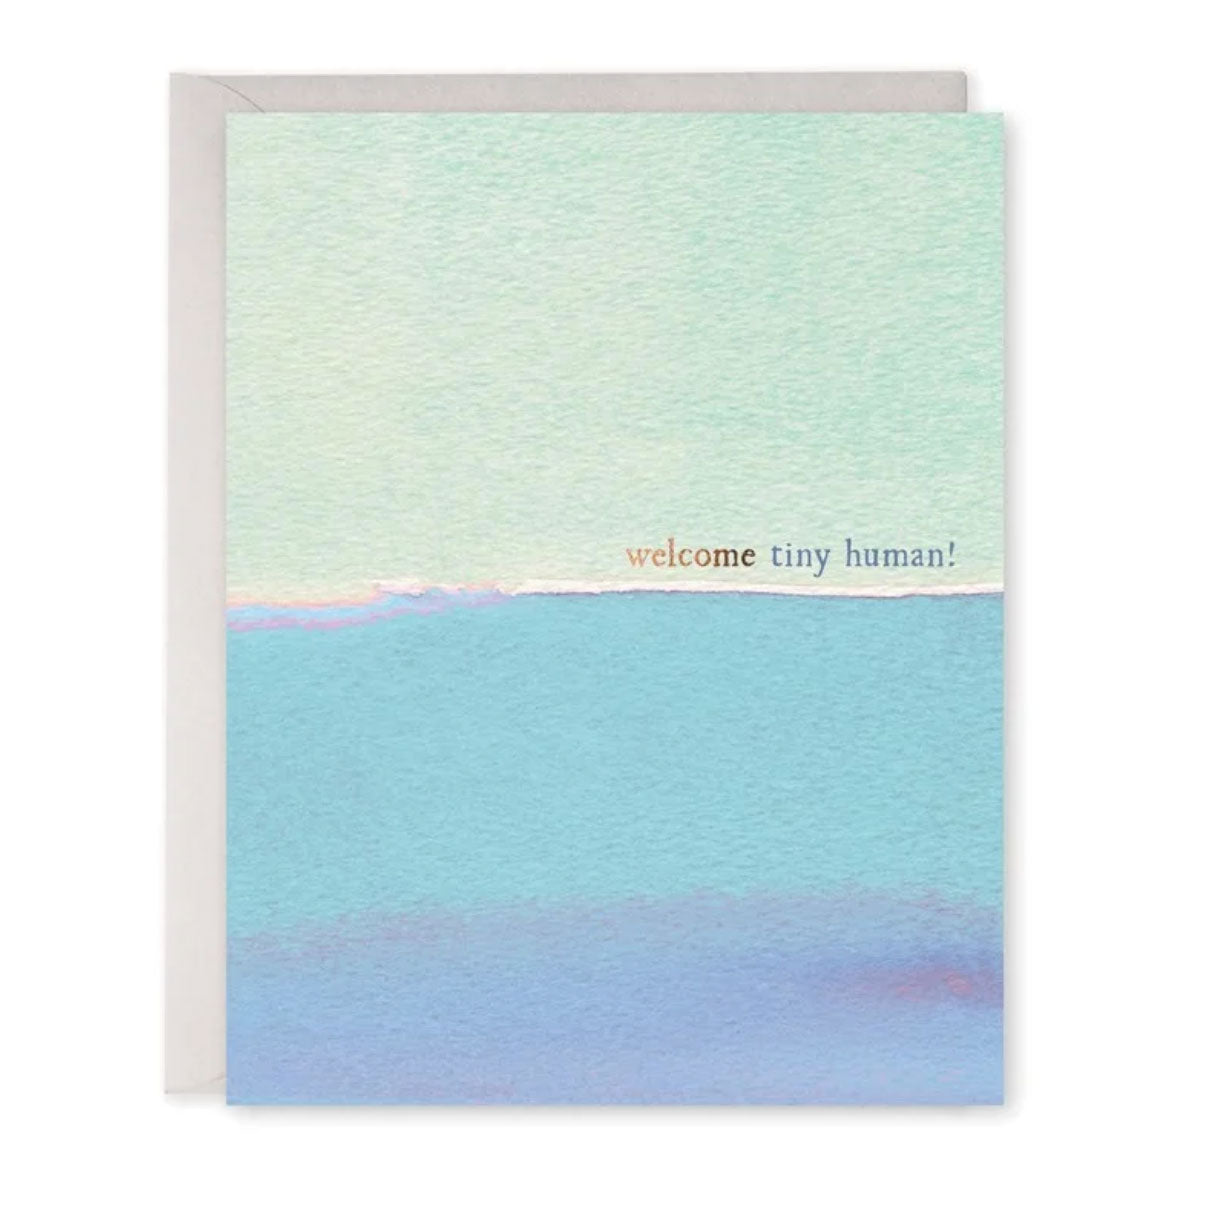 Welcome Tiny Human Greeting Card for a newborn at Bonjour Baby Baskets